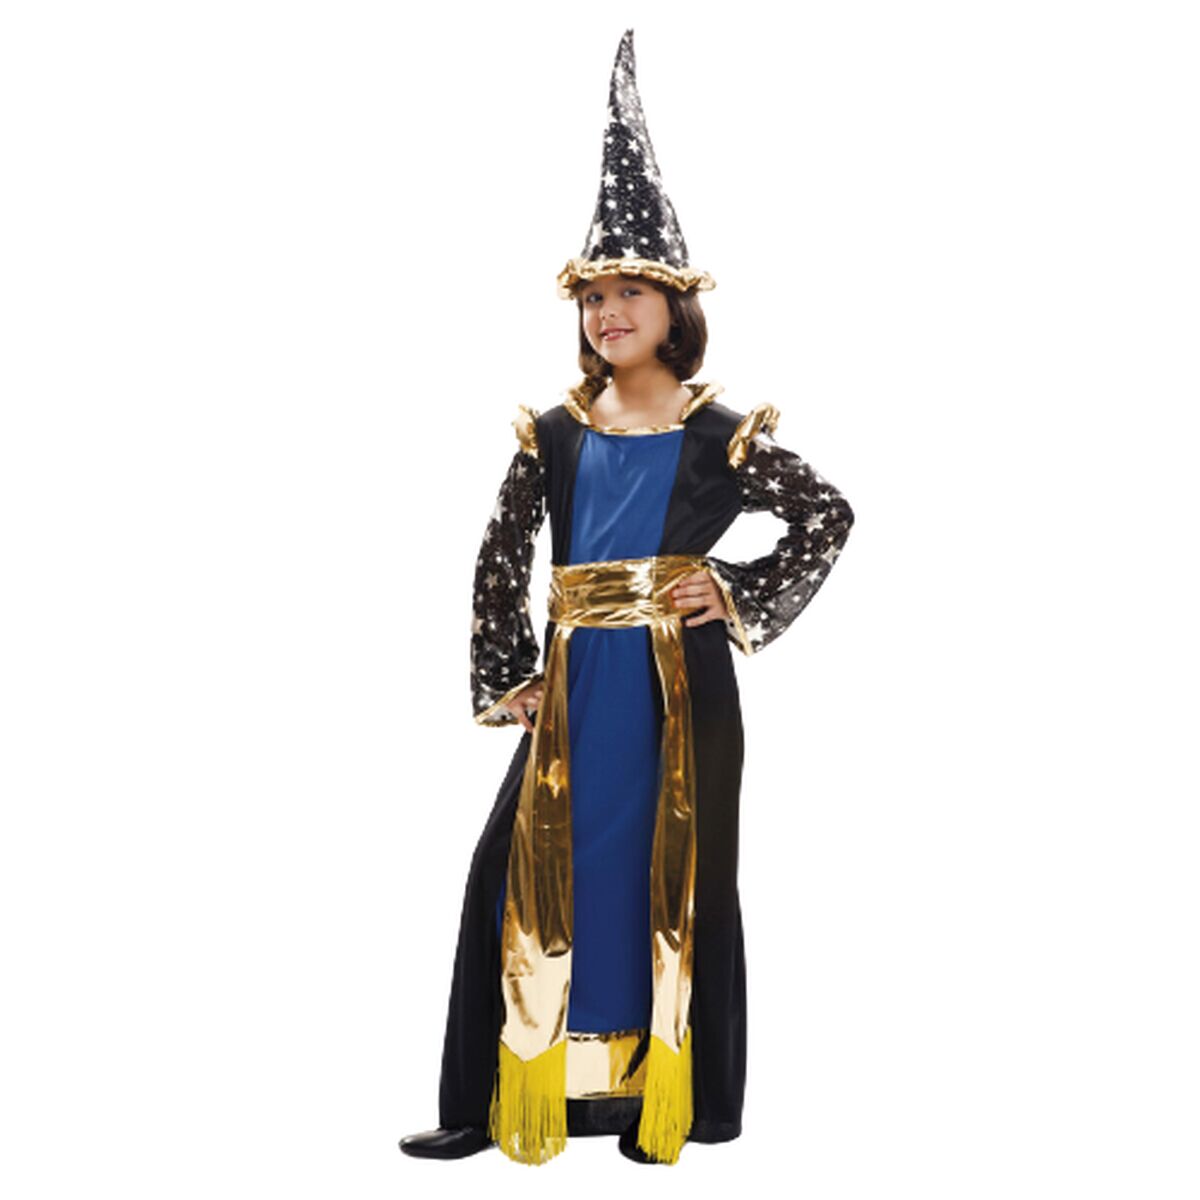 Costume for Children My Other Me Vivian Witch 3-4 Years (3 Pieces)